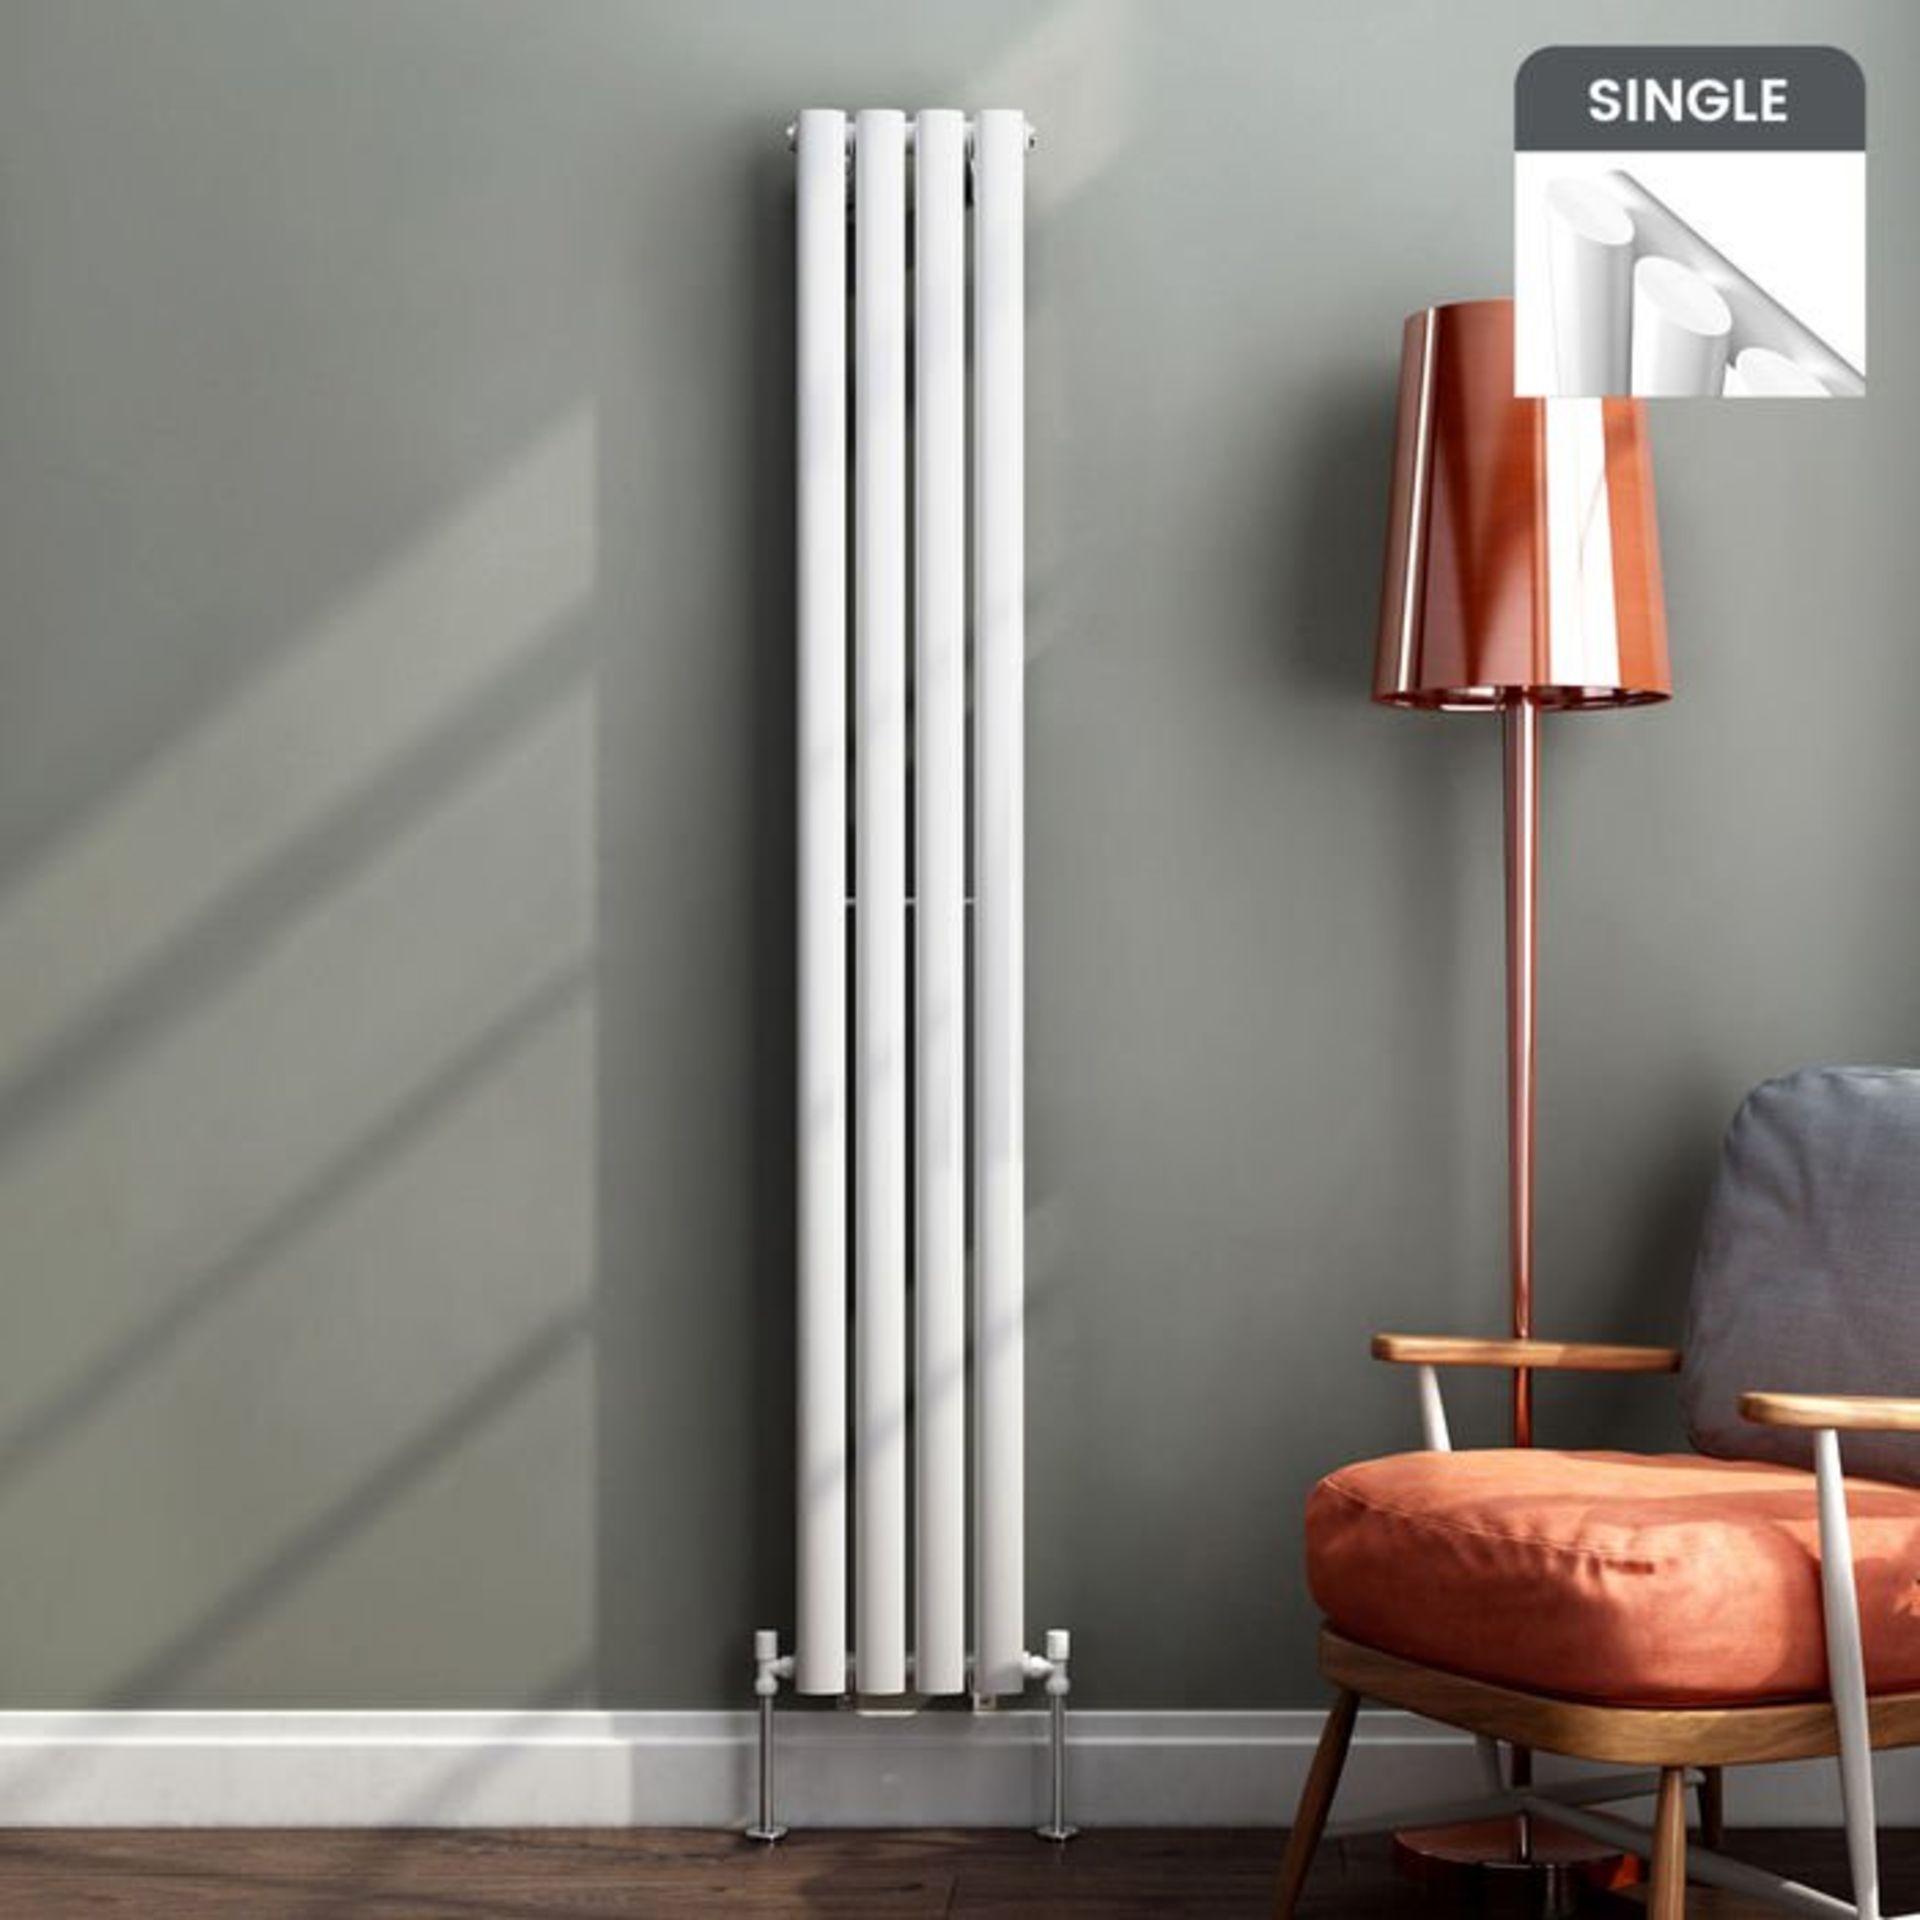 (G49) 1600x240mm Gloss White Single Oval Tube Vertical Radiator. Low carbon steel, high quality